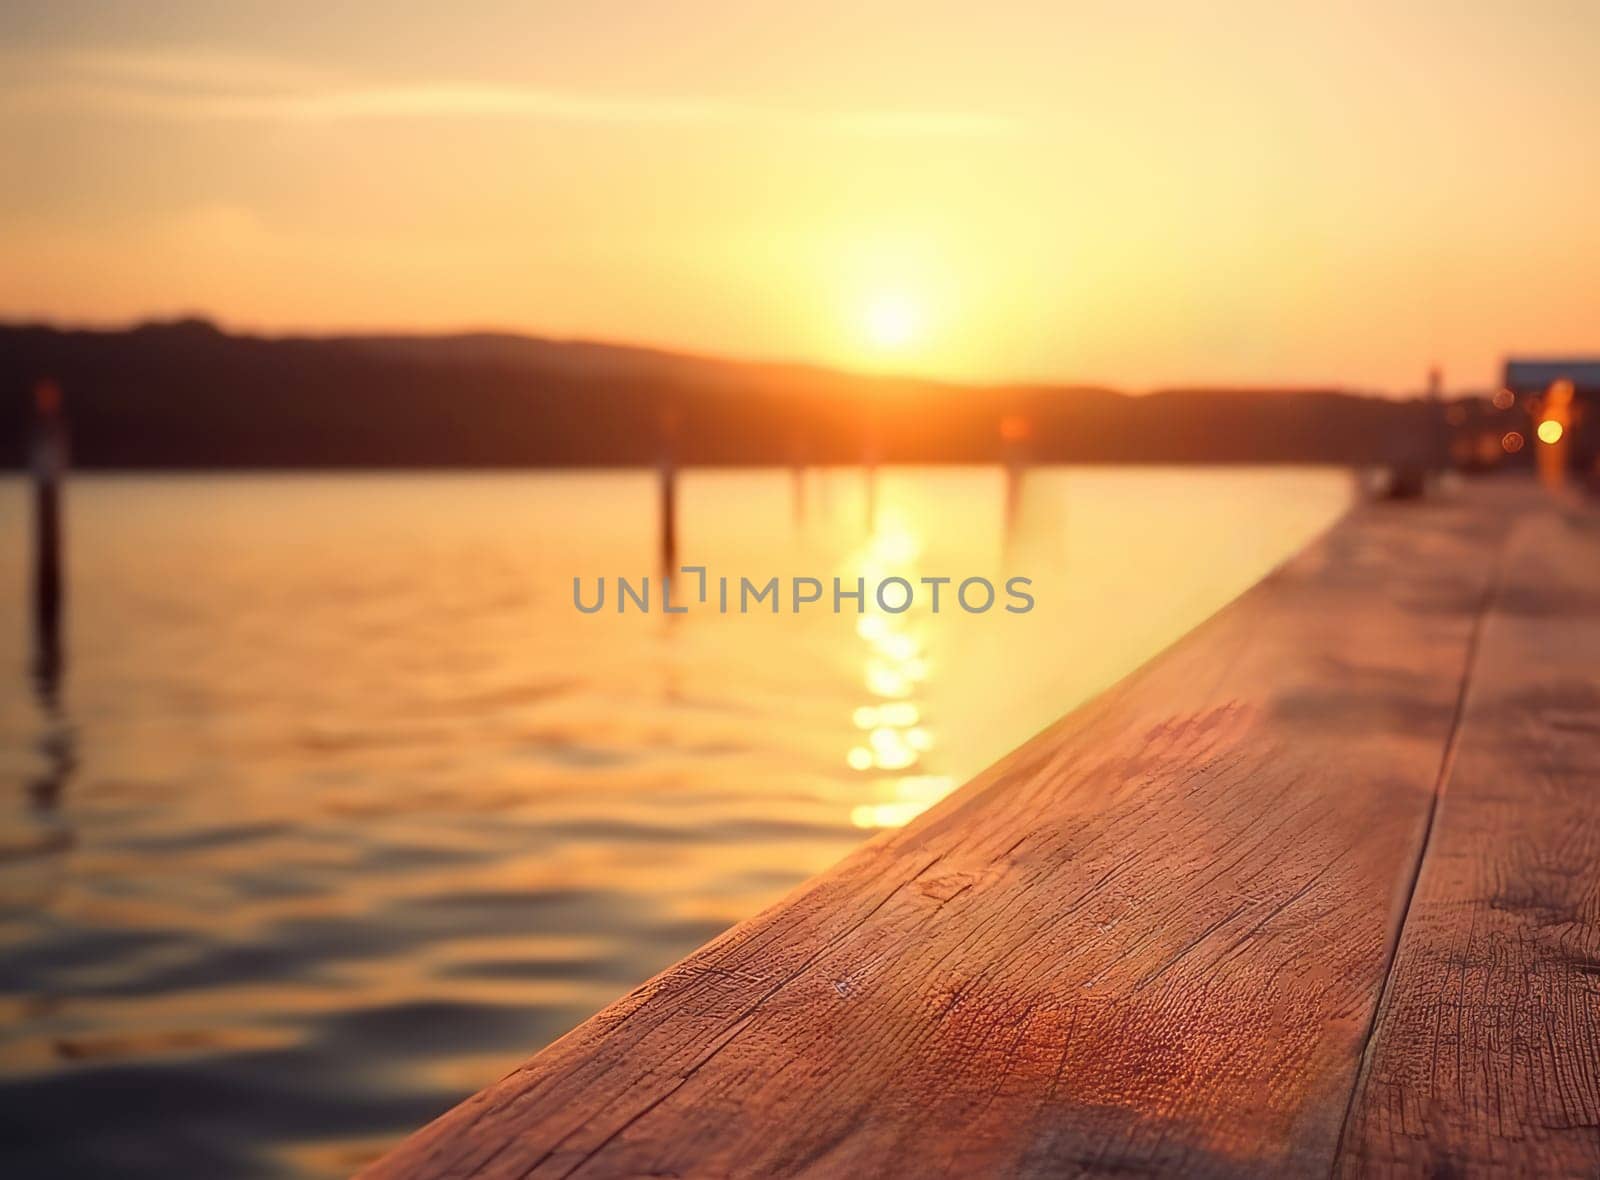 Beautiful sunset over a tranquil lake with a wooden pier in the foreground